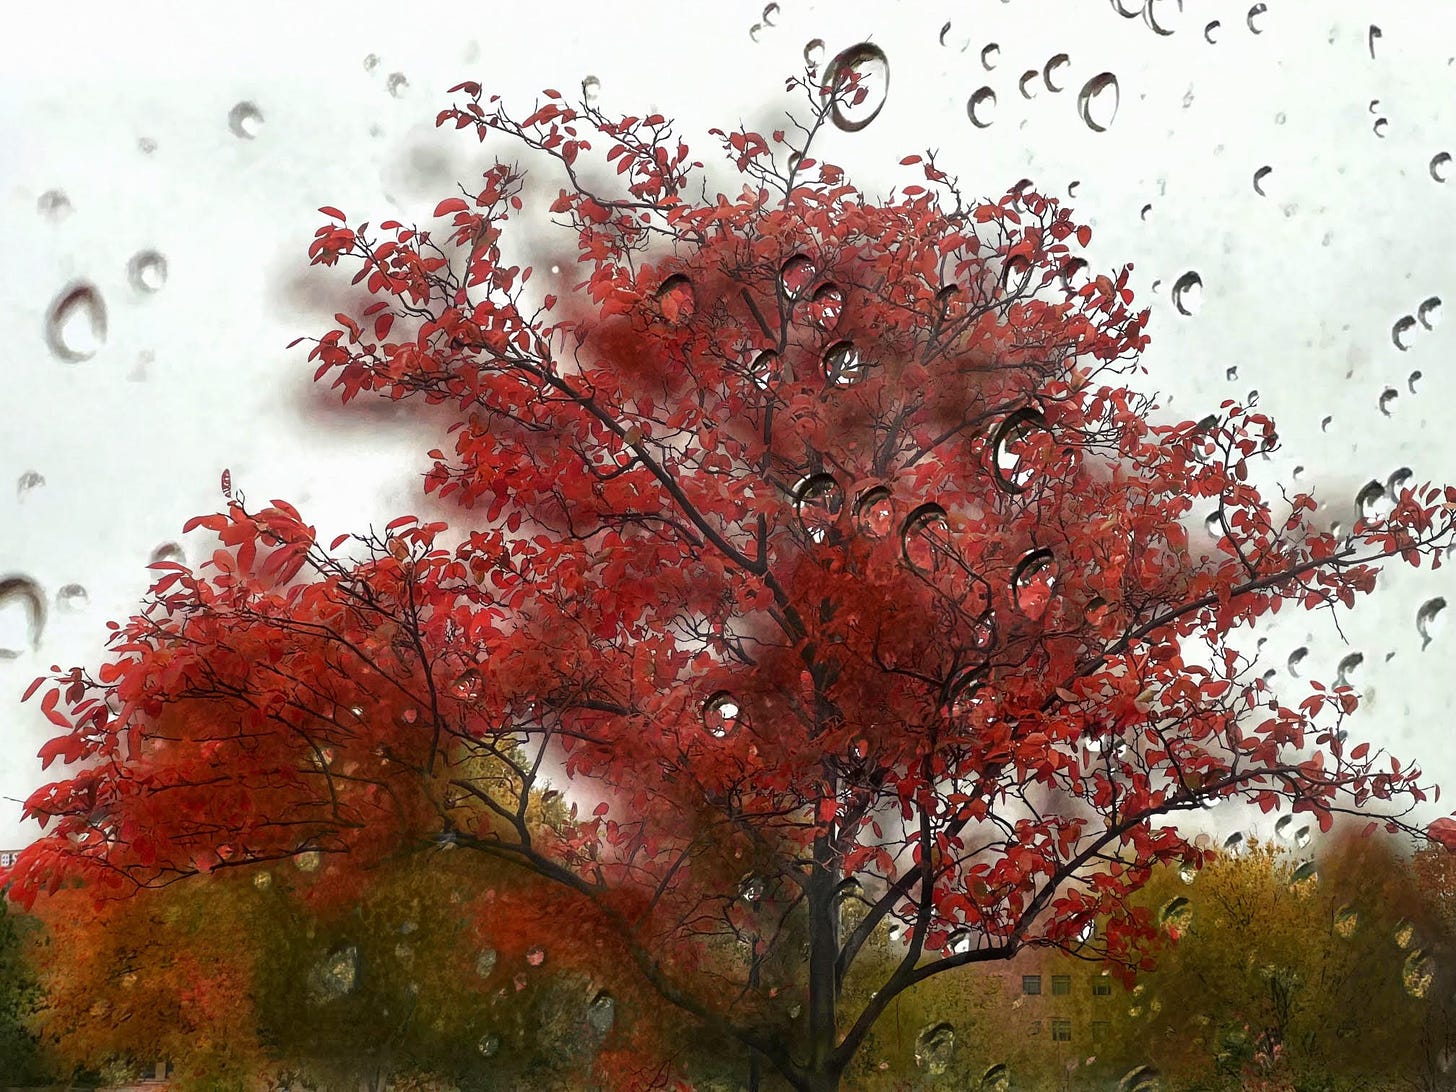 A tree of red leaves against a background of pale sky is viewed through a lens spattered with water droplets.